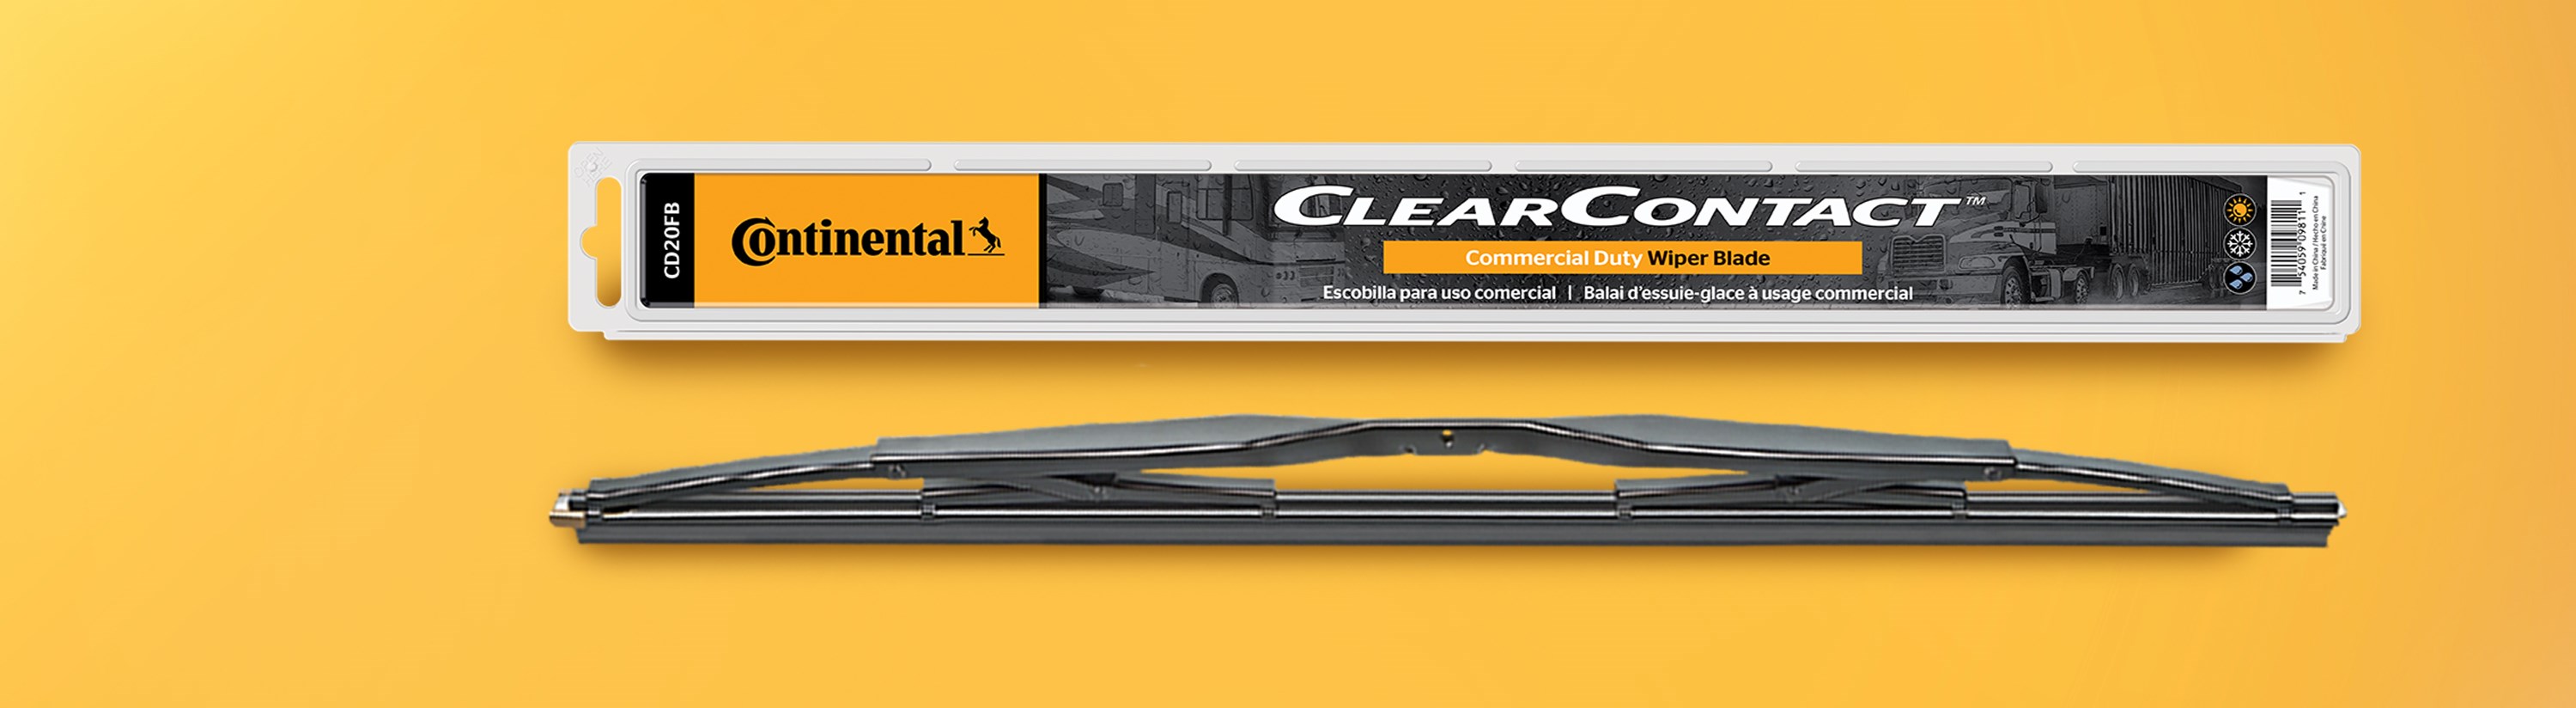 Clearcontact Commercial Duty Wiper Blades Header